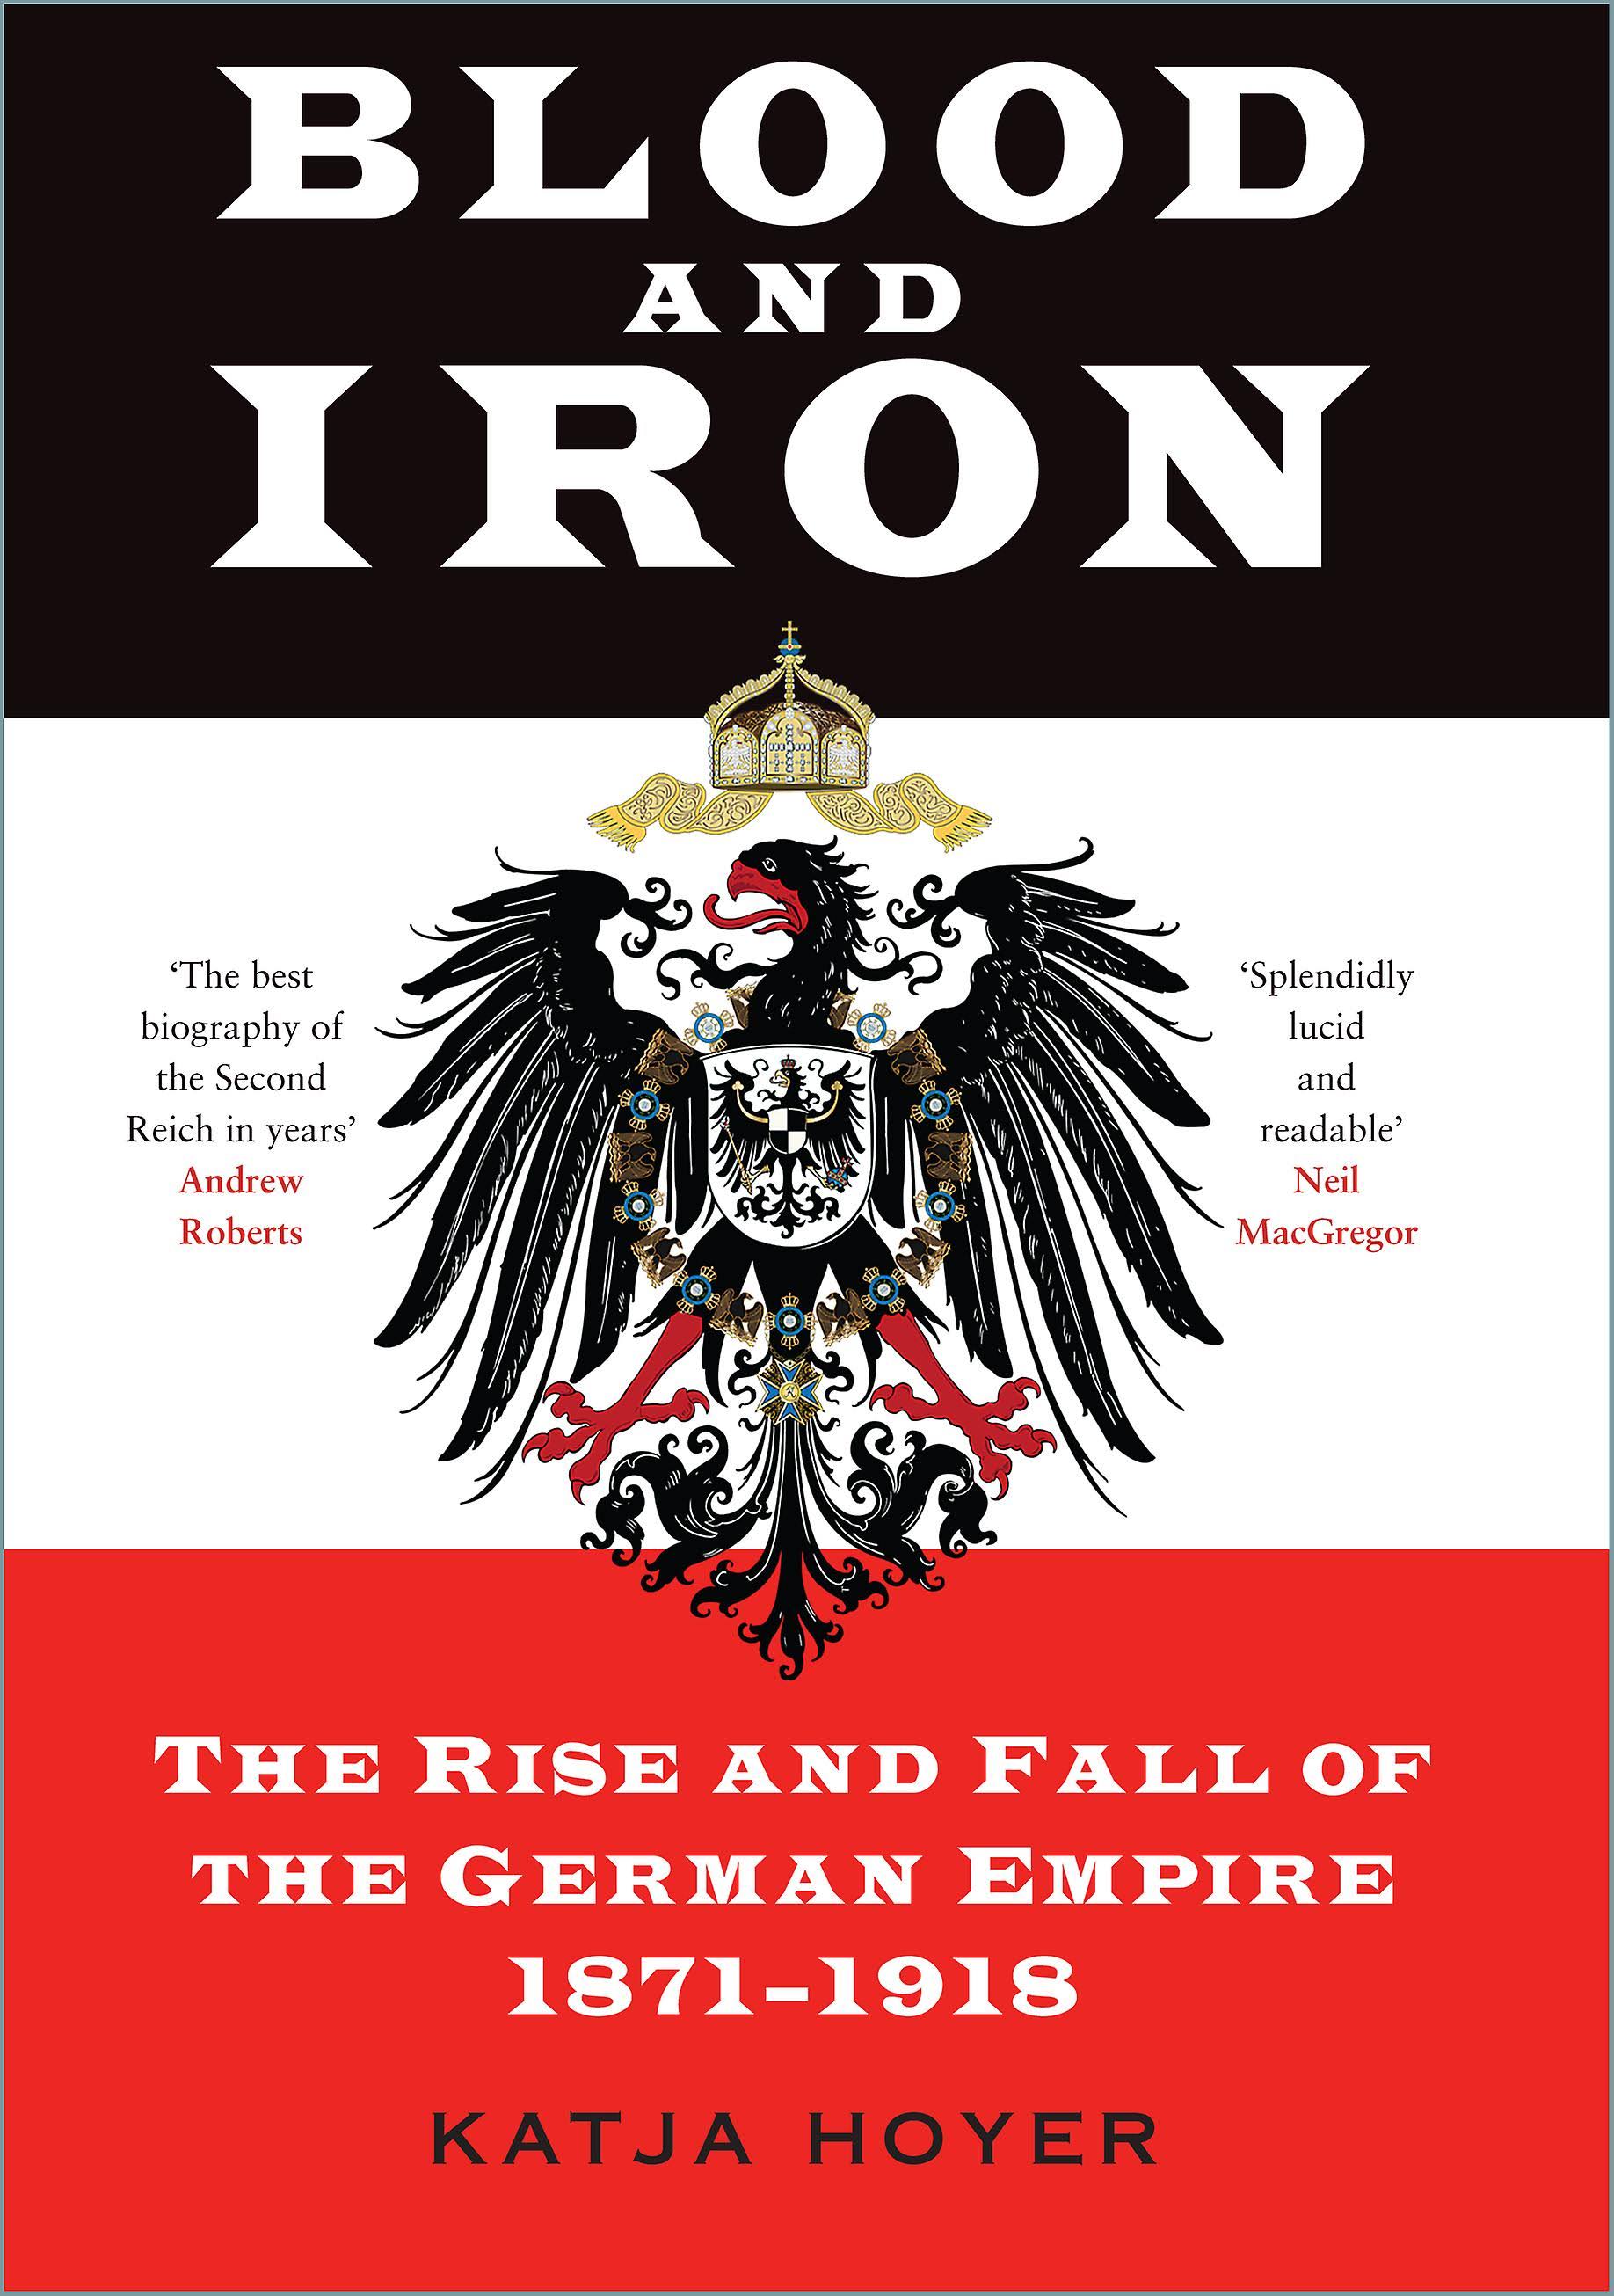 Blood and Iron: The Rise and Fall of the German Empire 1871-1918 [Book]